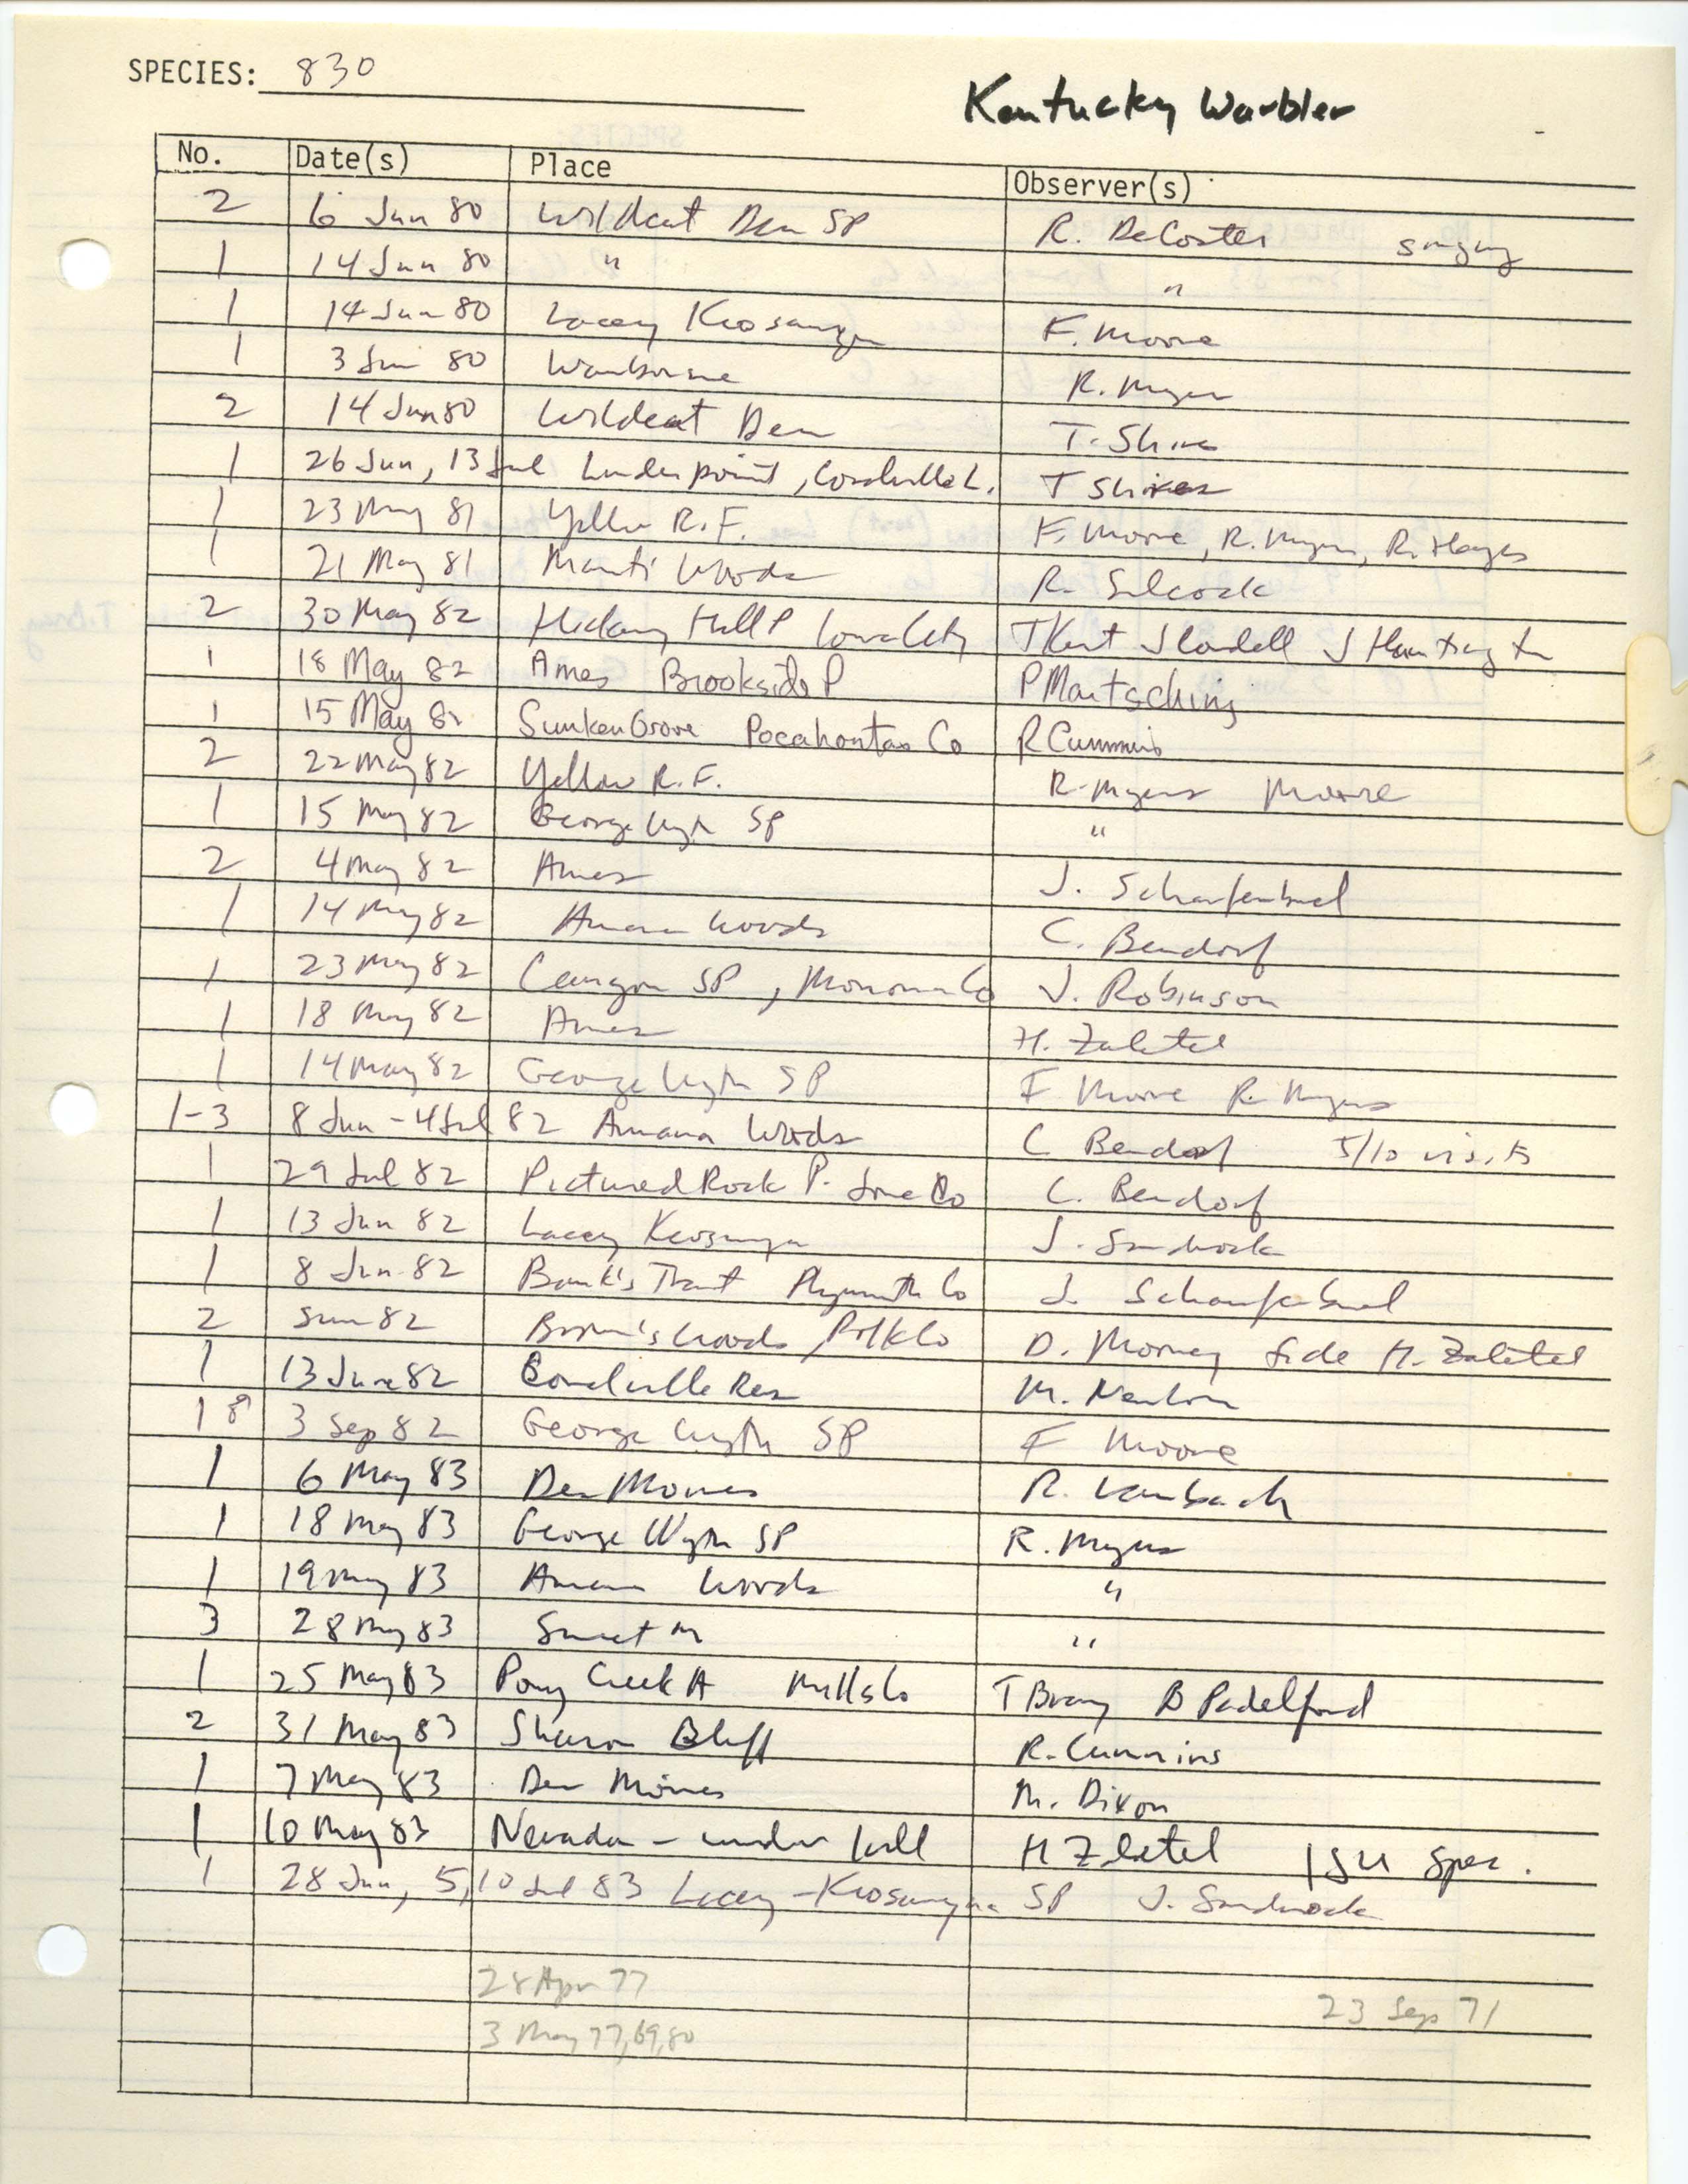 Iowa Ornithologists' Union, field report compiled data, Kentucky Warbler, 1980-1983